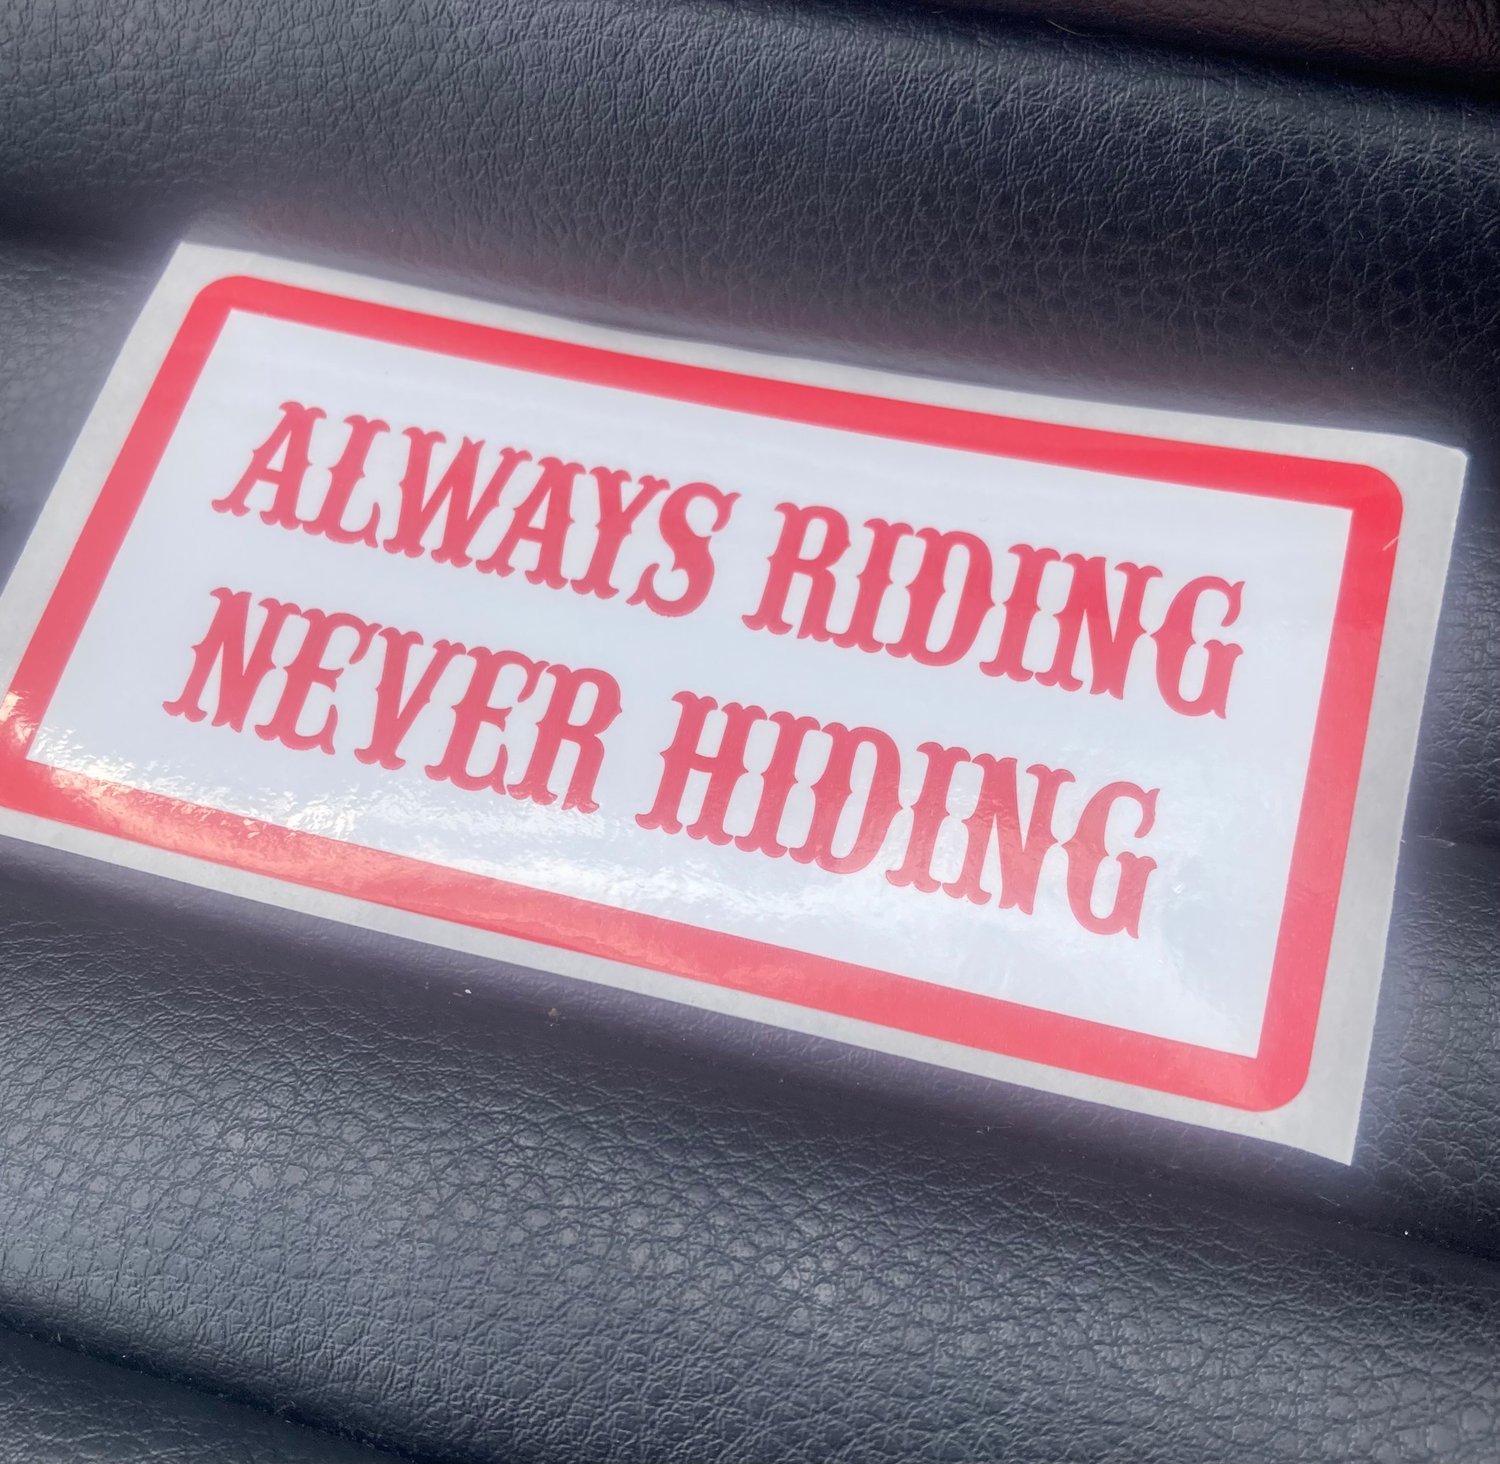 Image of Always riding never hiding sticker 